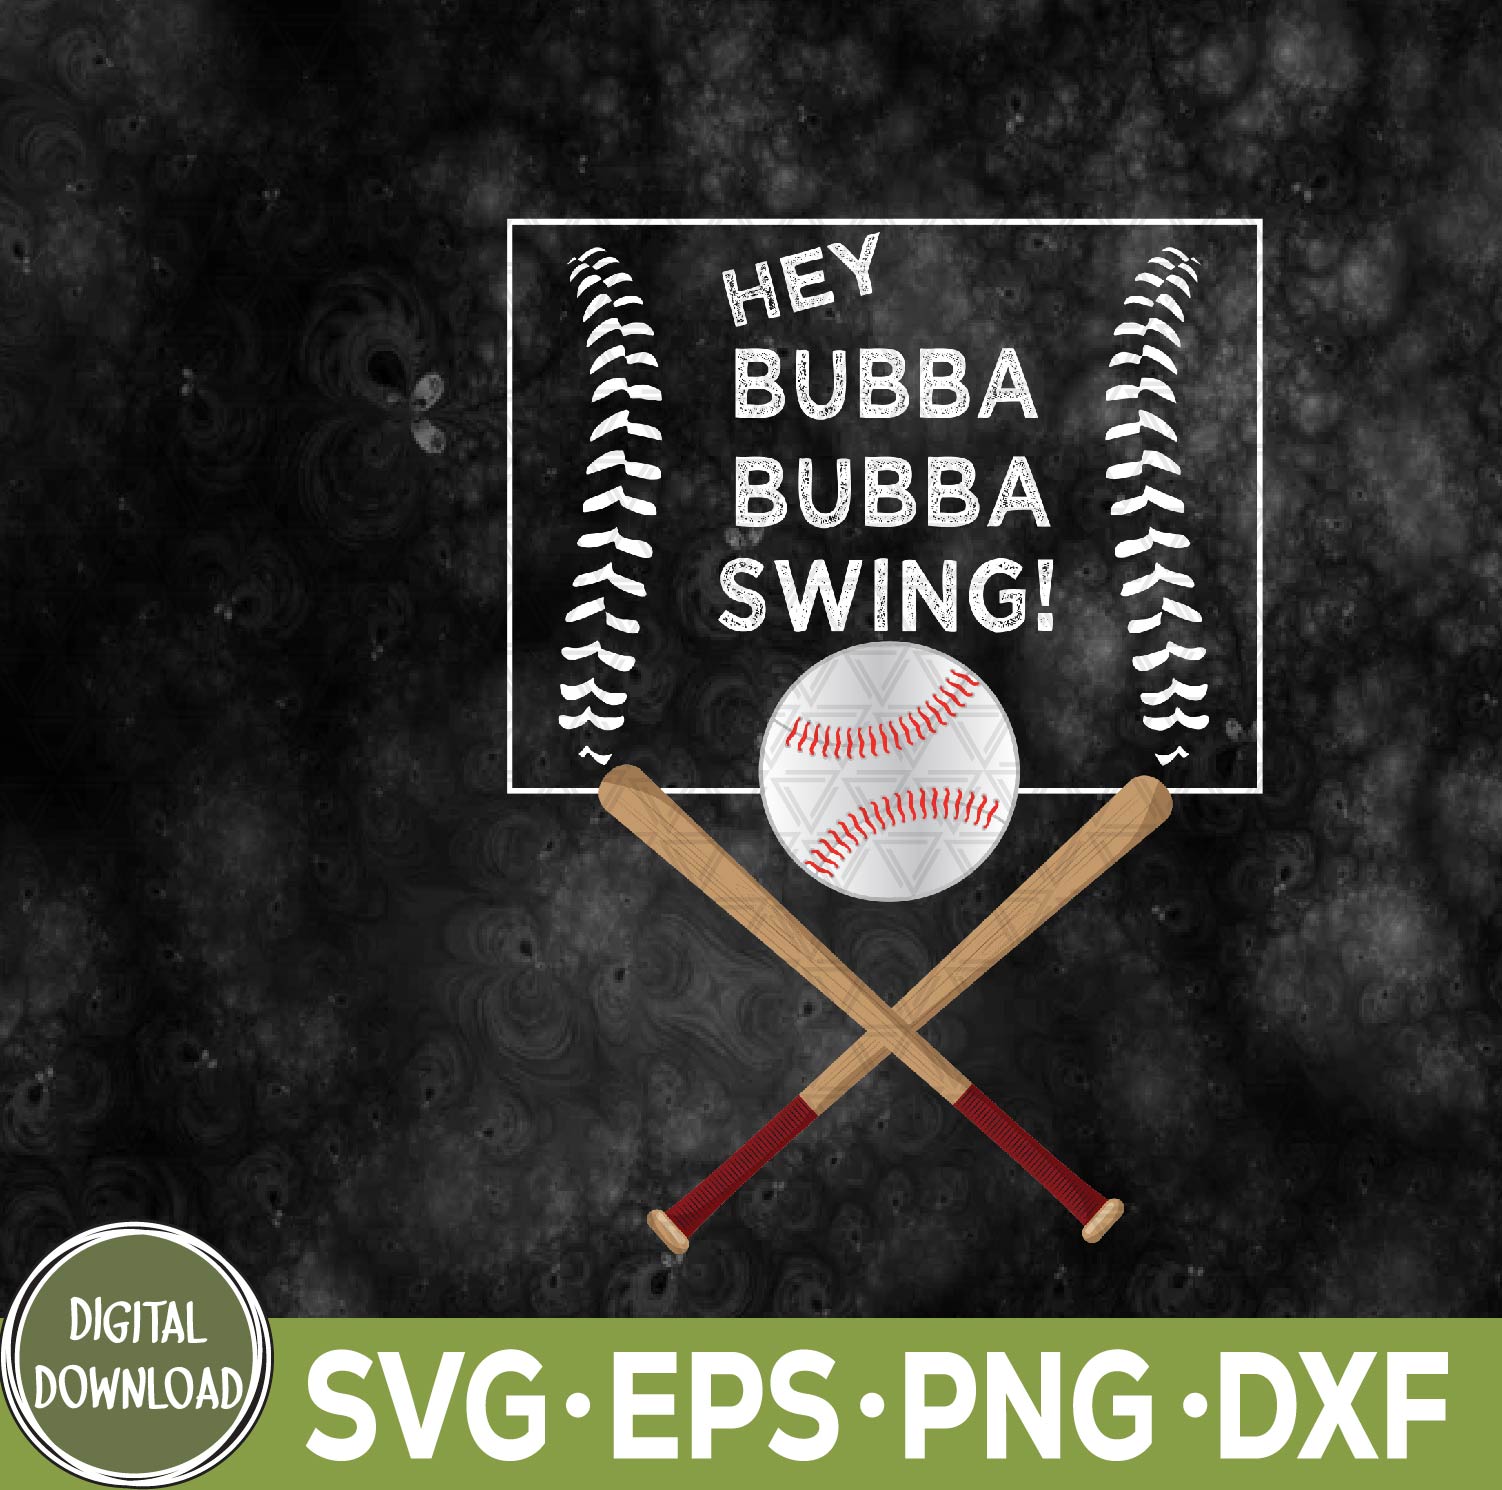 WTMNEW9file 09 51 Hey Bubba Swing Baseball Svg, Eps, Png, Dxf